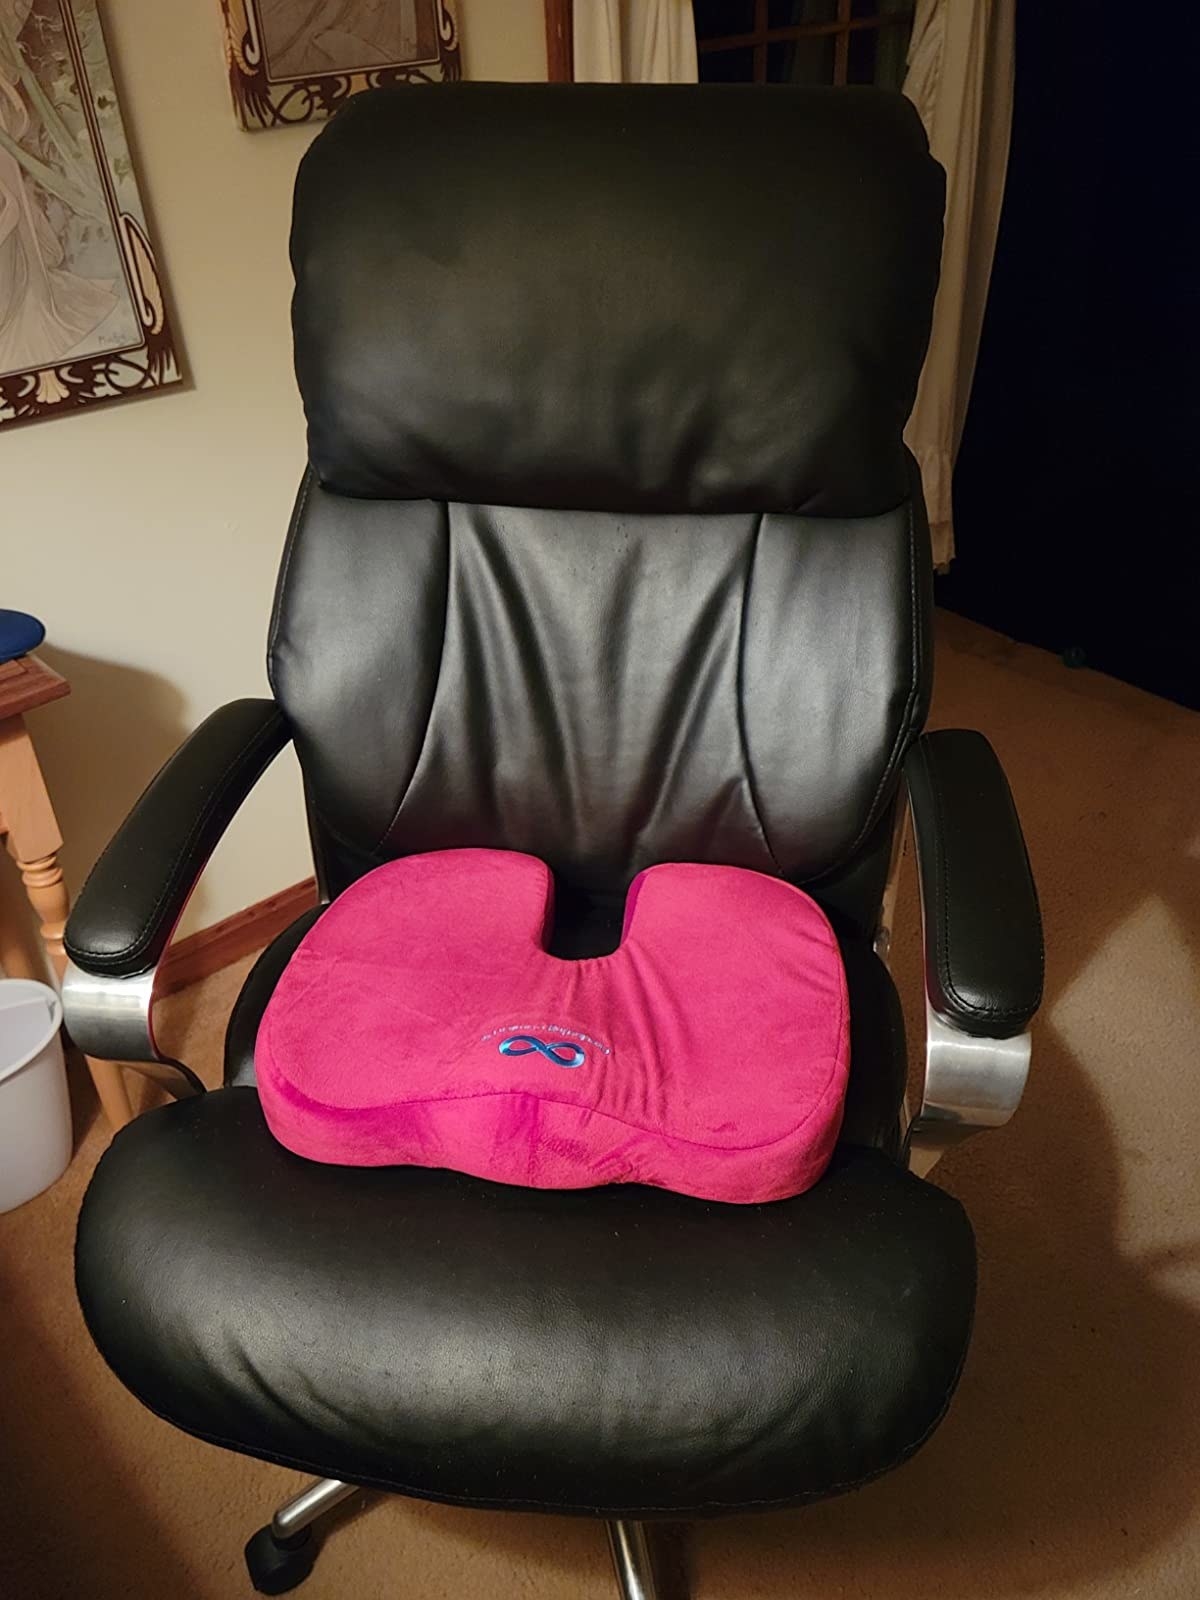 the cushion in red in a computer chair